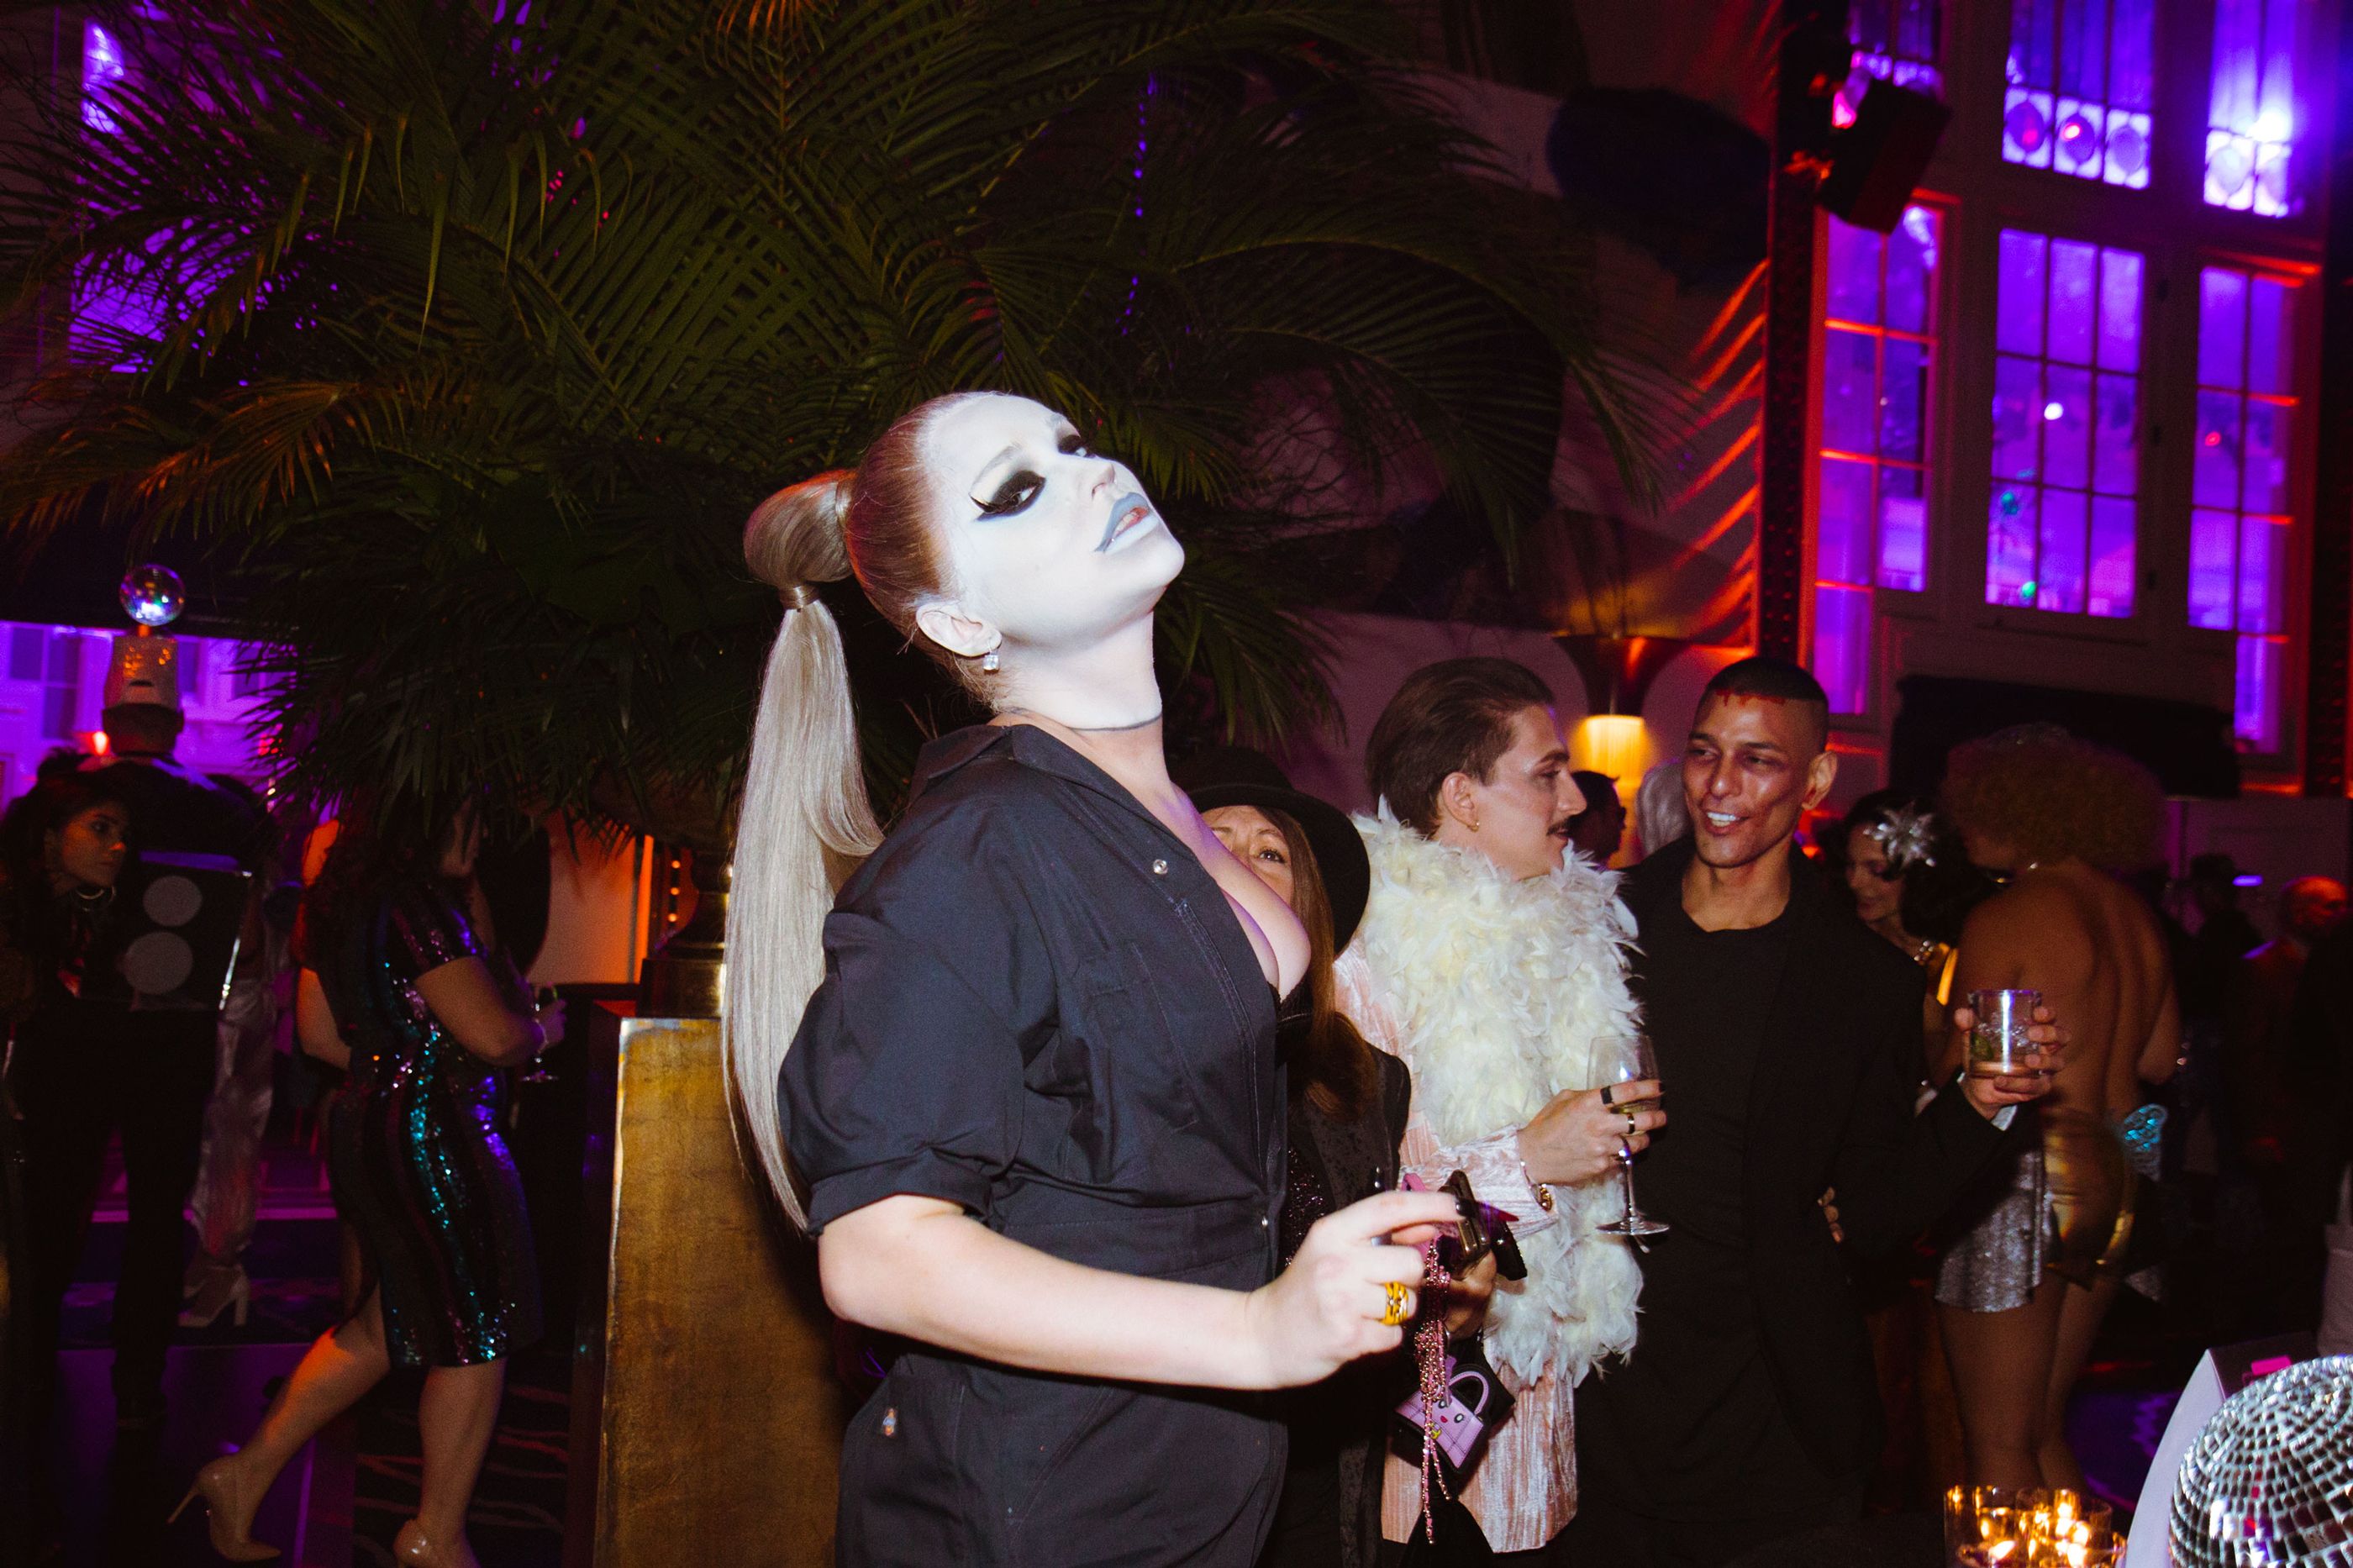 Dj Soda Fuck - Partying With Kim Petras at Bette Midler's Halloween Gala